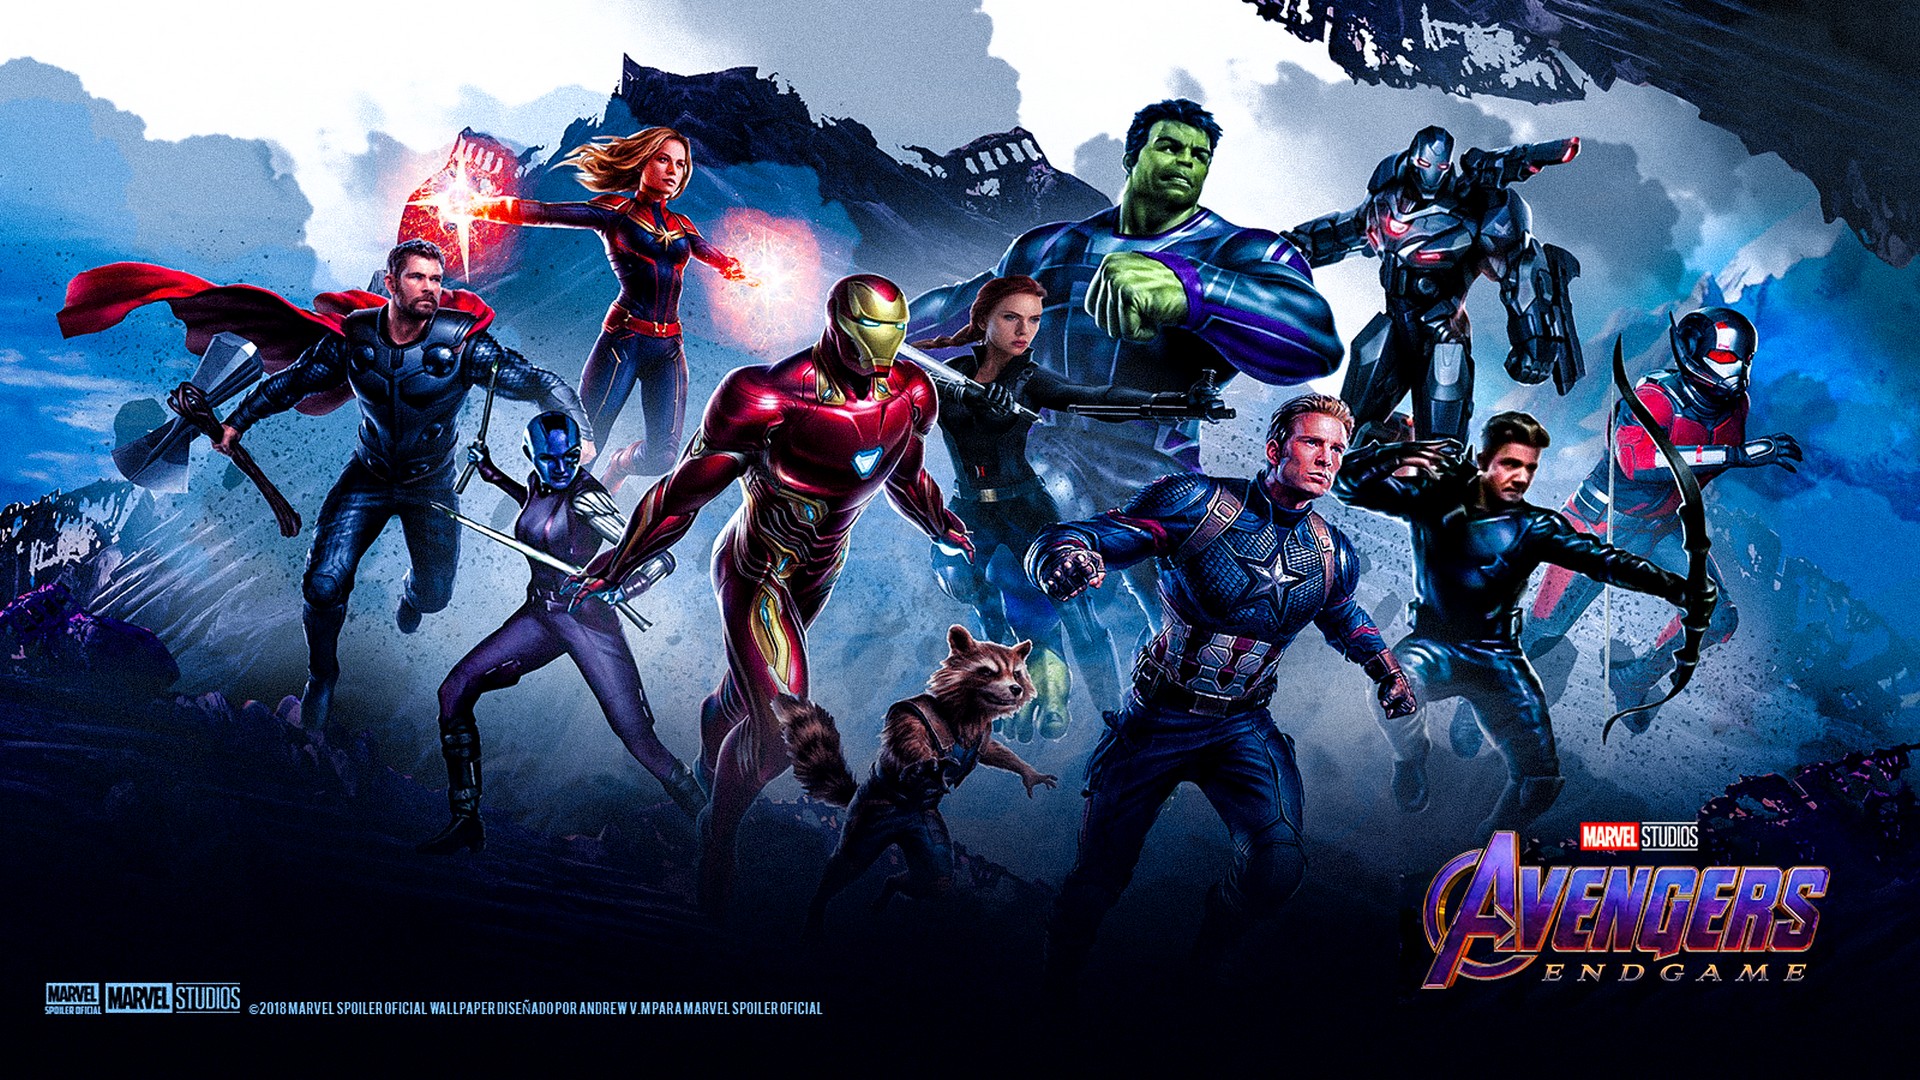 Avengers Endgame Wallpaper HD with high-resolution 1920x1080 pixel. You can use this wallpaper for your Desktop Computer Backgrounds, Mac Wallpapers, Android Lock screen or iPhone Screensavers and another smartphone device